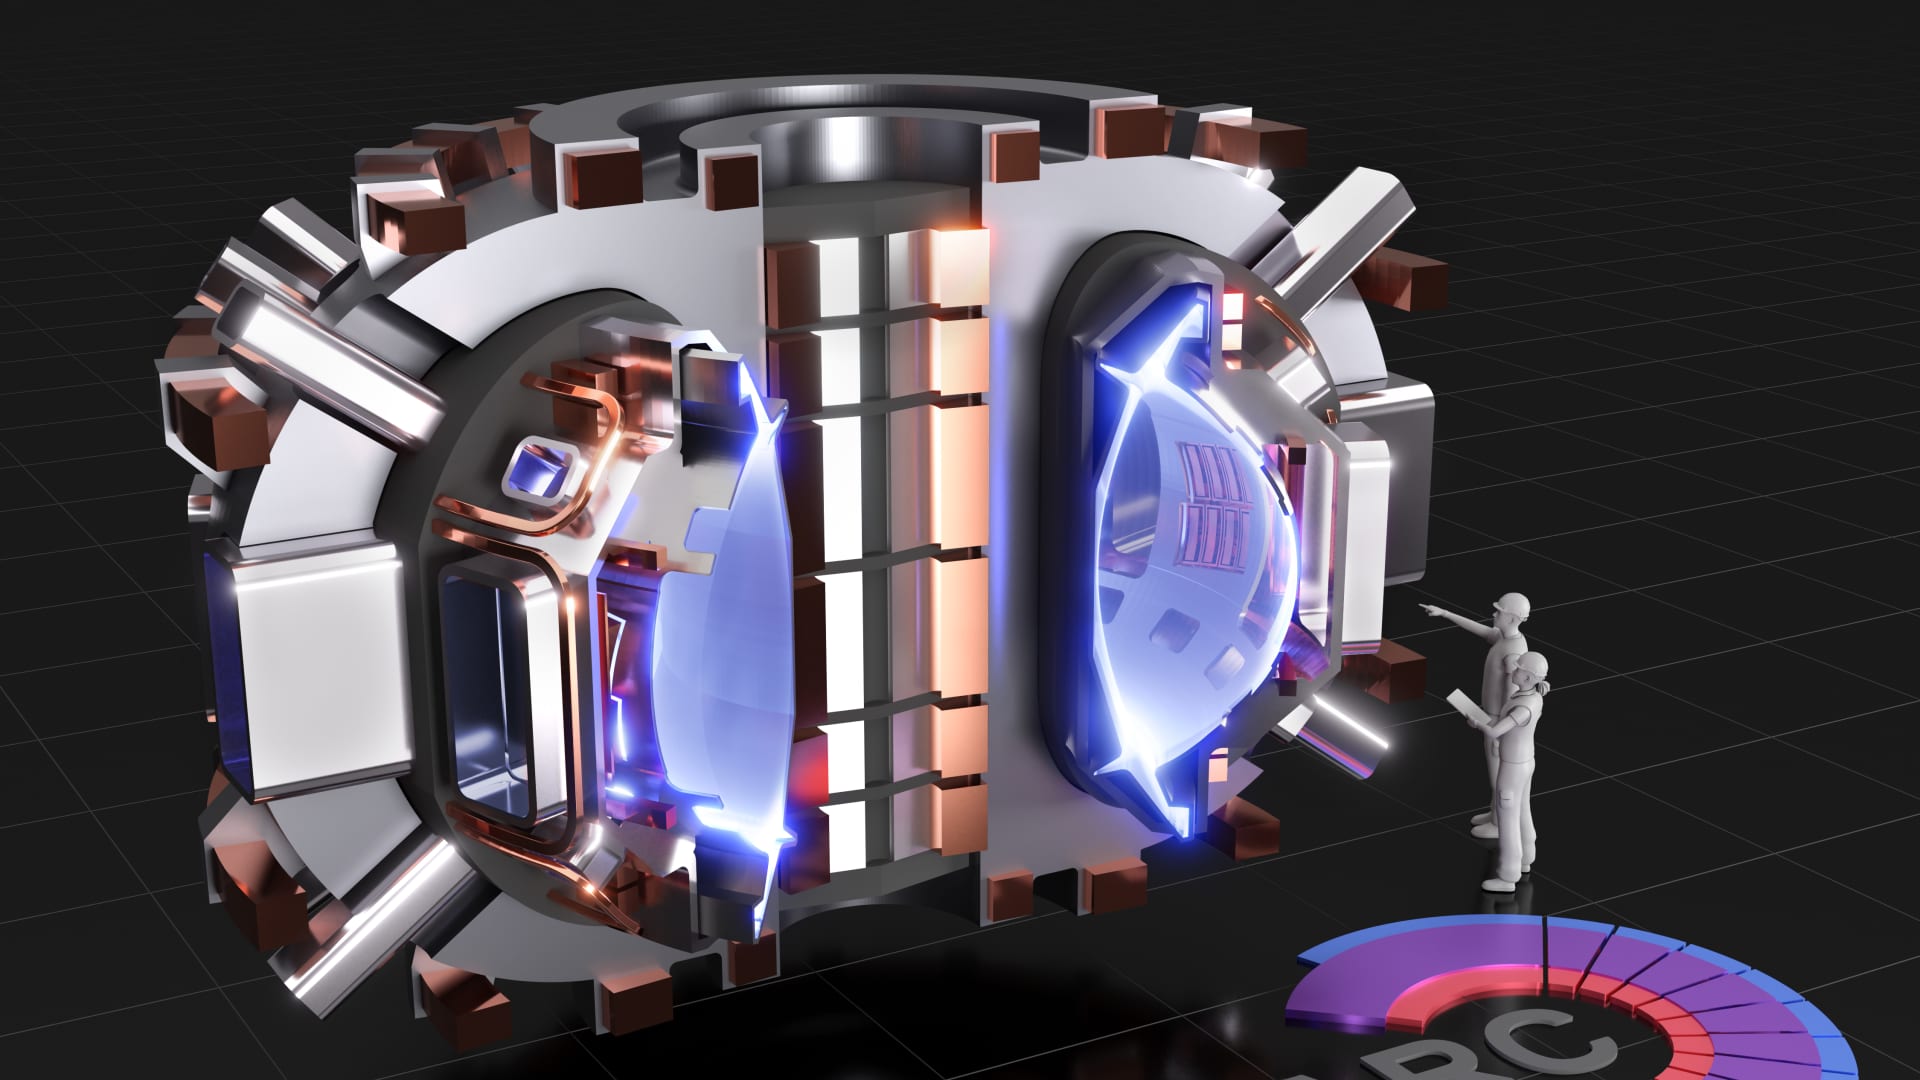 This is a rendering of the SPARC, a tokamak machine currently being designed by the team from the Massachusetts Institute of Technology and Commonwealth Fusion Systems, which aims to create and confine a plasma to create energy with fusion.